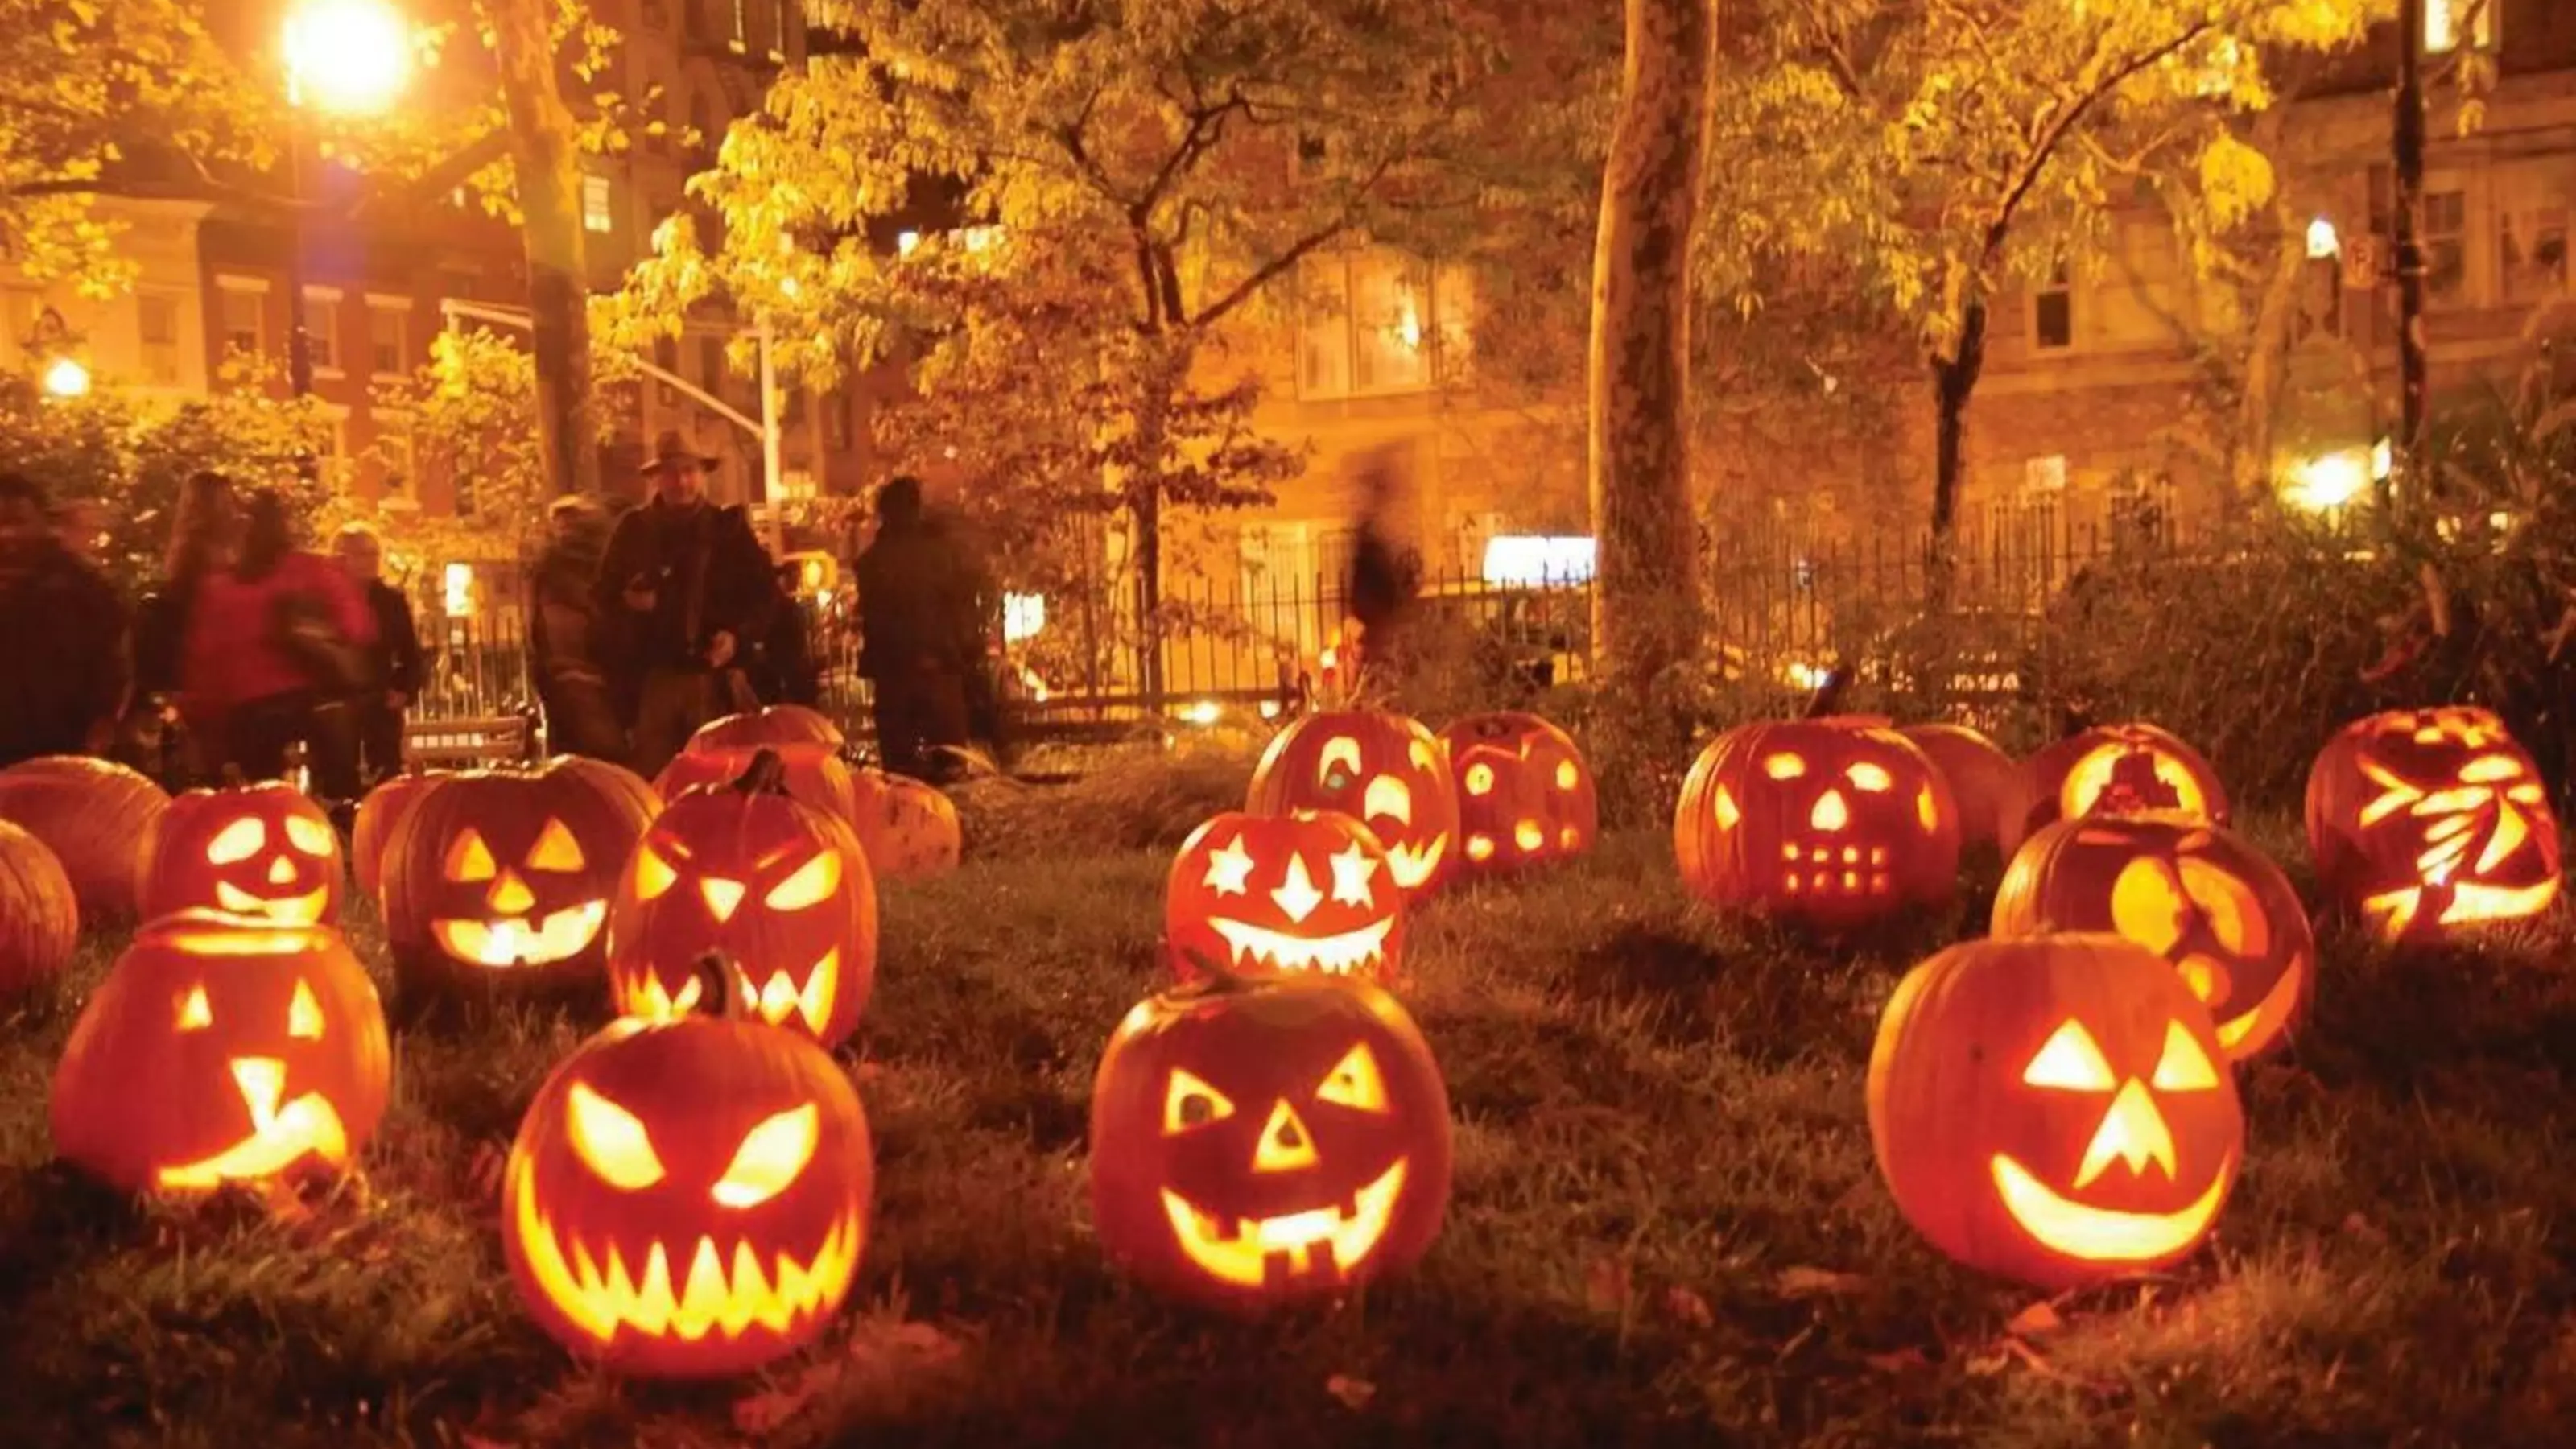 Multiple large carved pumpkins lit up in a small park 